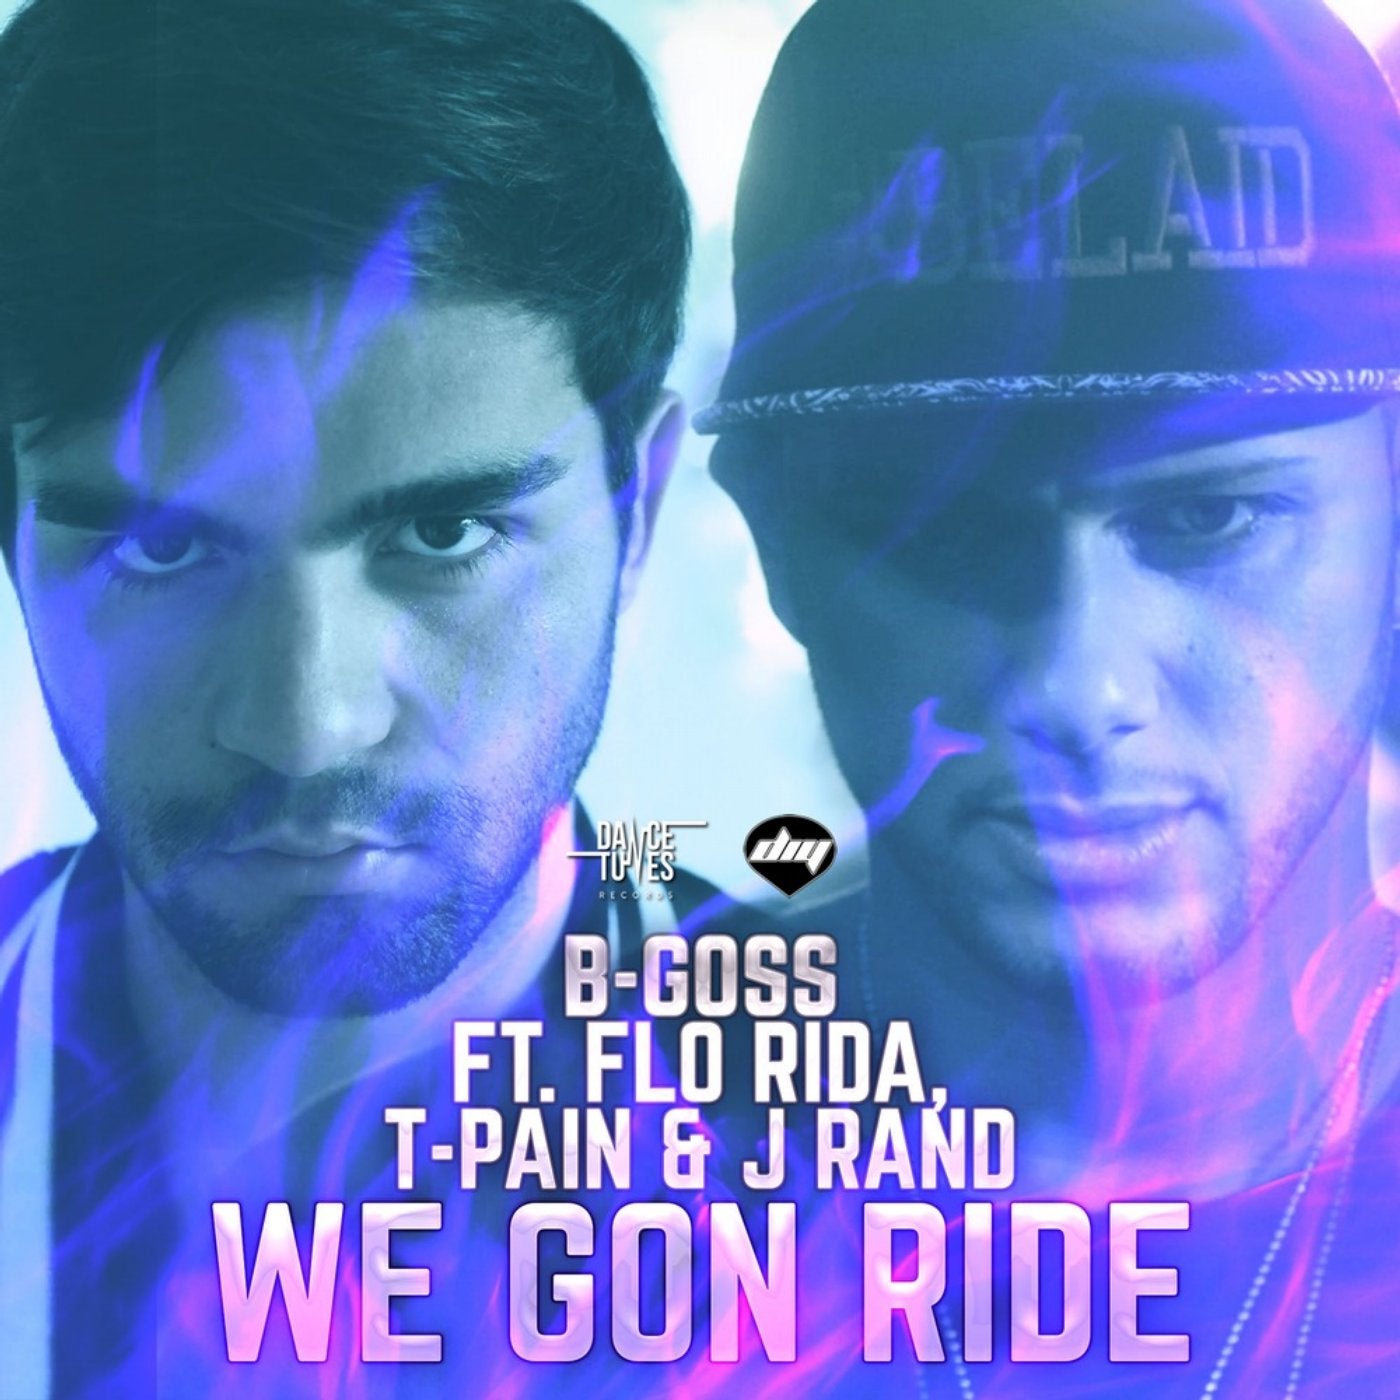 We Gon Ride (feat. Flo Rida, T Pain, J Rand)